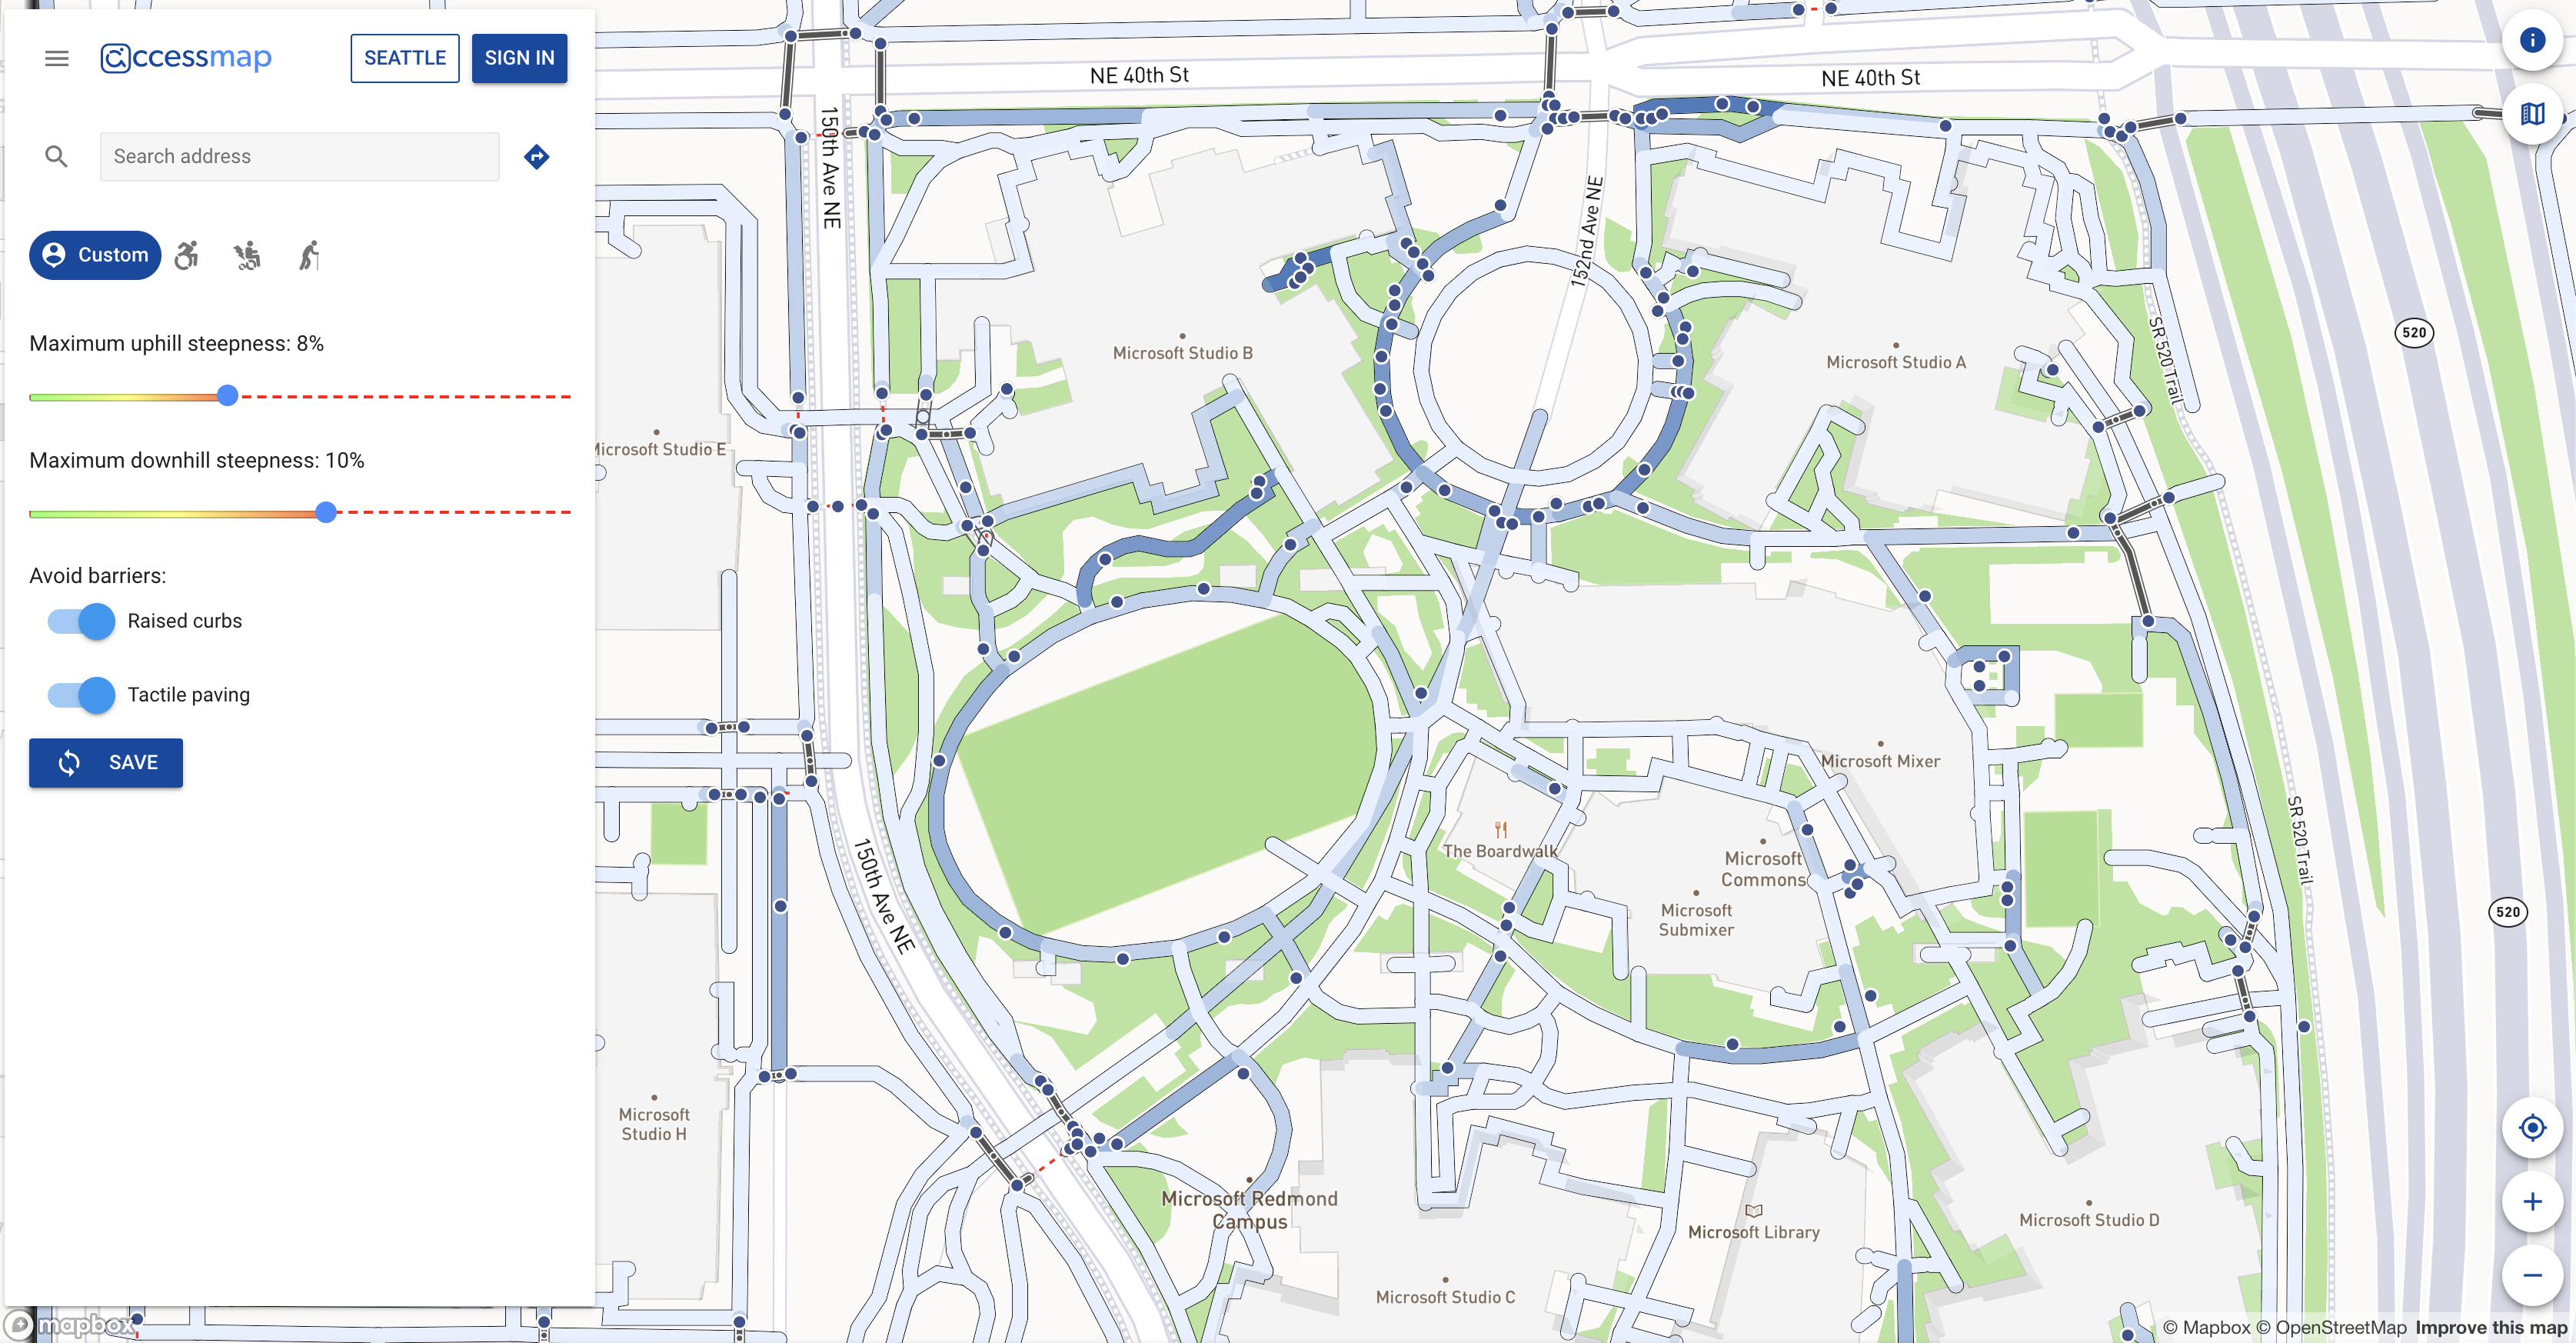 A screenshot of the AccessMap application, with edges colored according to how many landmarks are nearby.